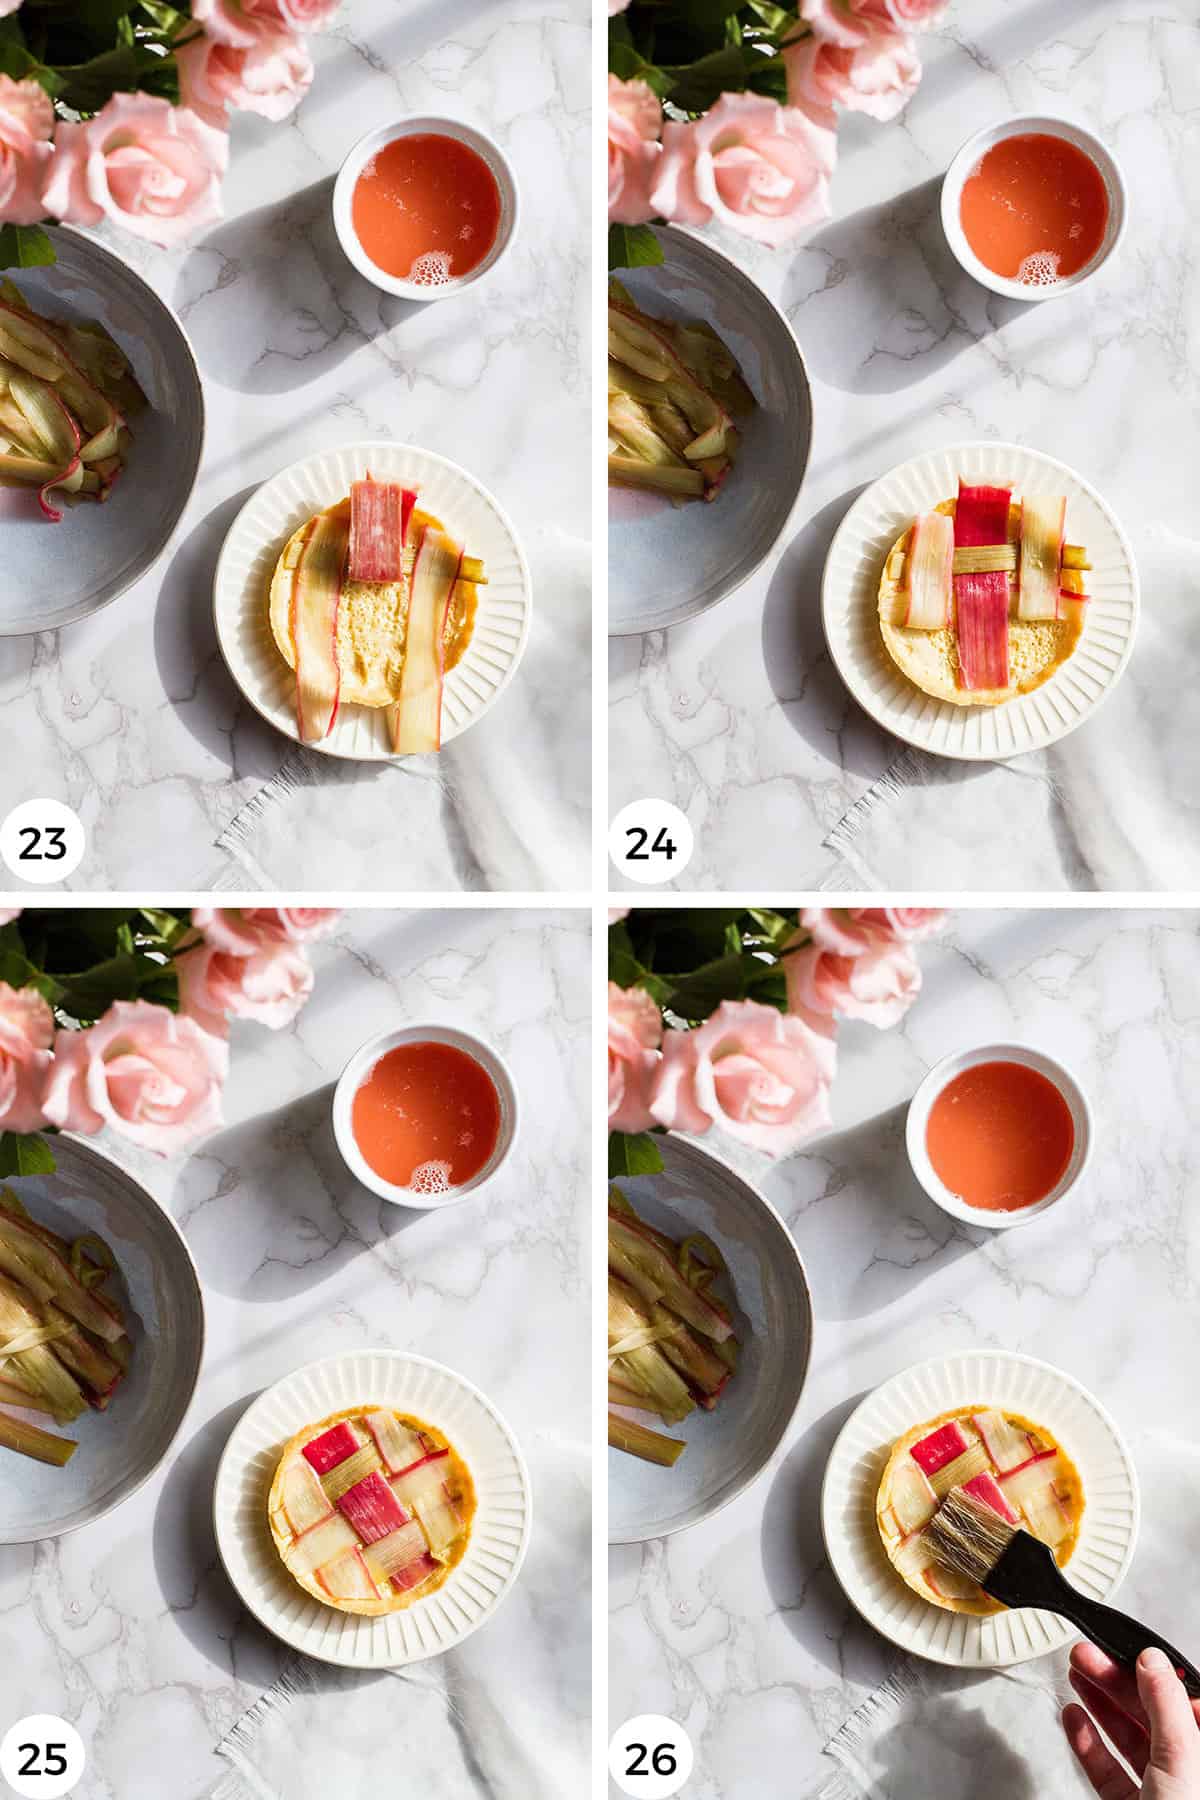 Steps to shape the rhubarb into a lattice pattern.